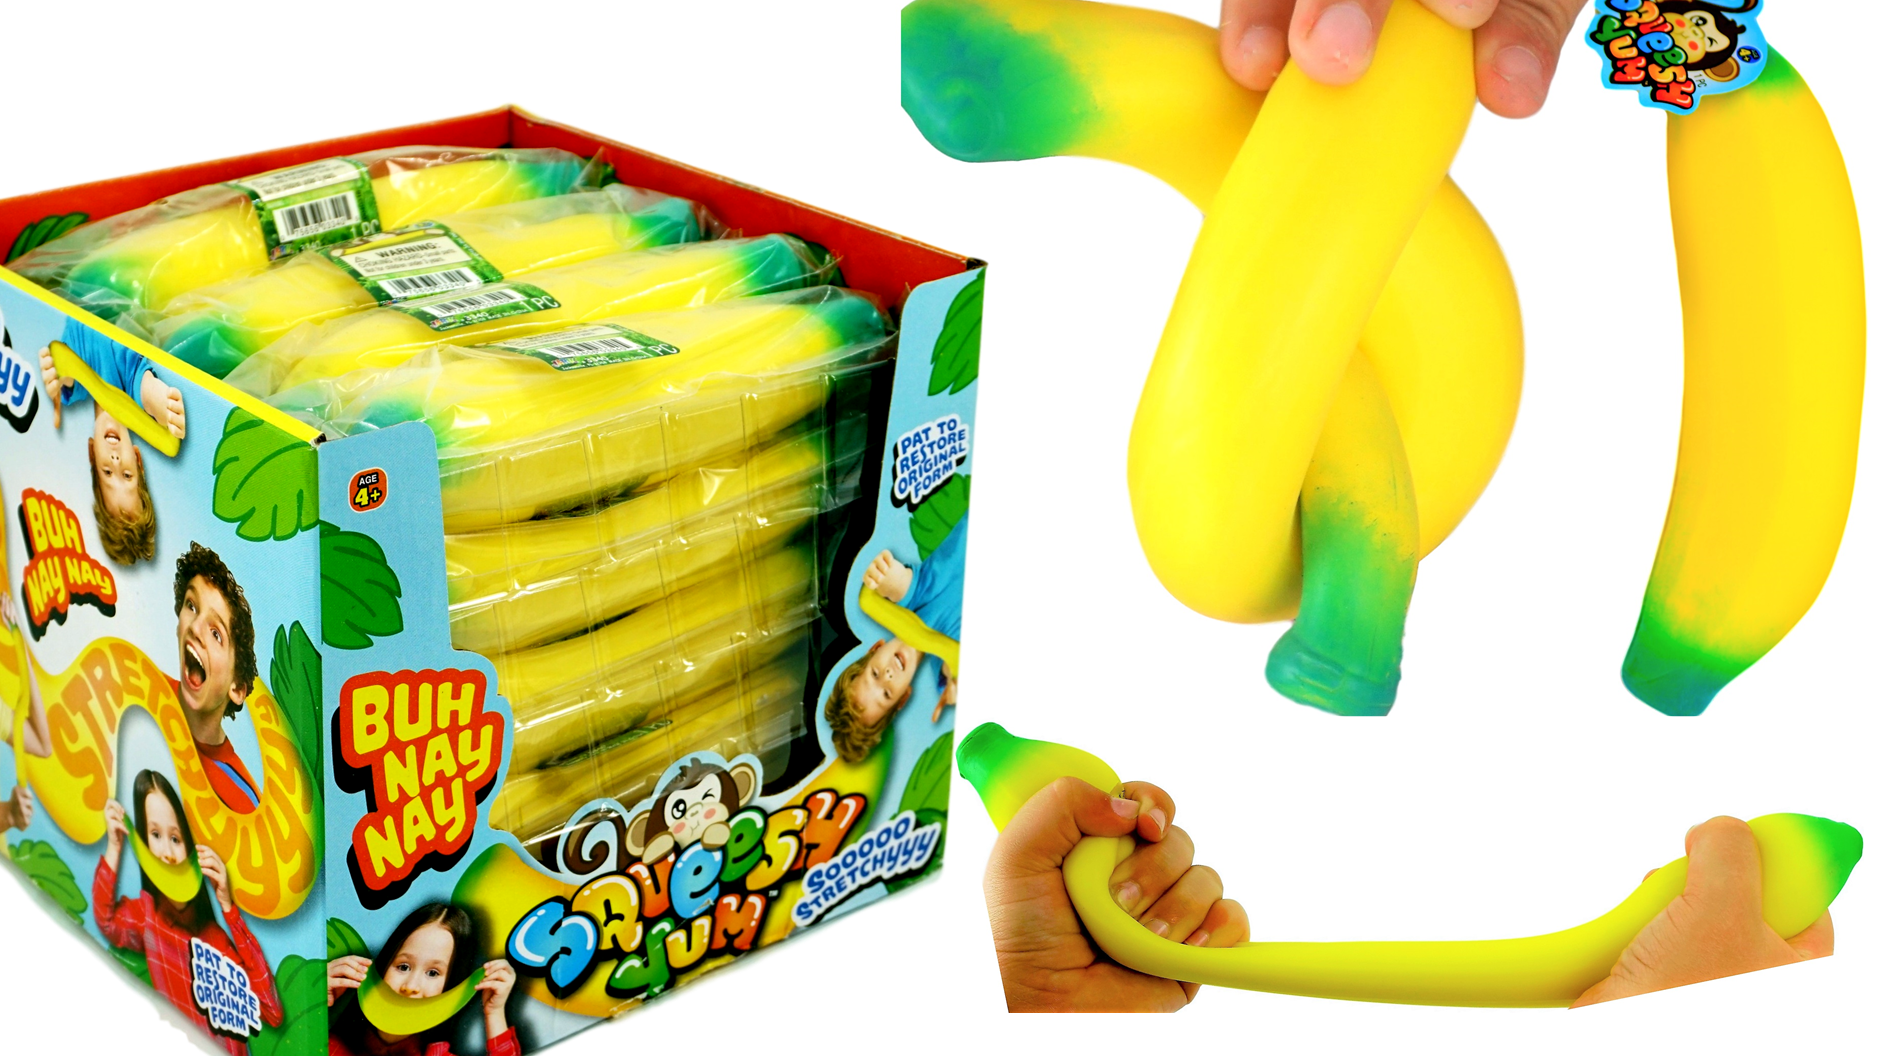 TY6279 SQUISH SQUASH RELIEF STRETCHY FRUIT MULTI COLOURED BANANA STRESS TOY